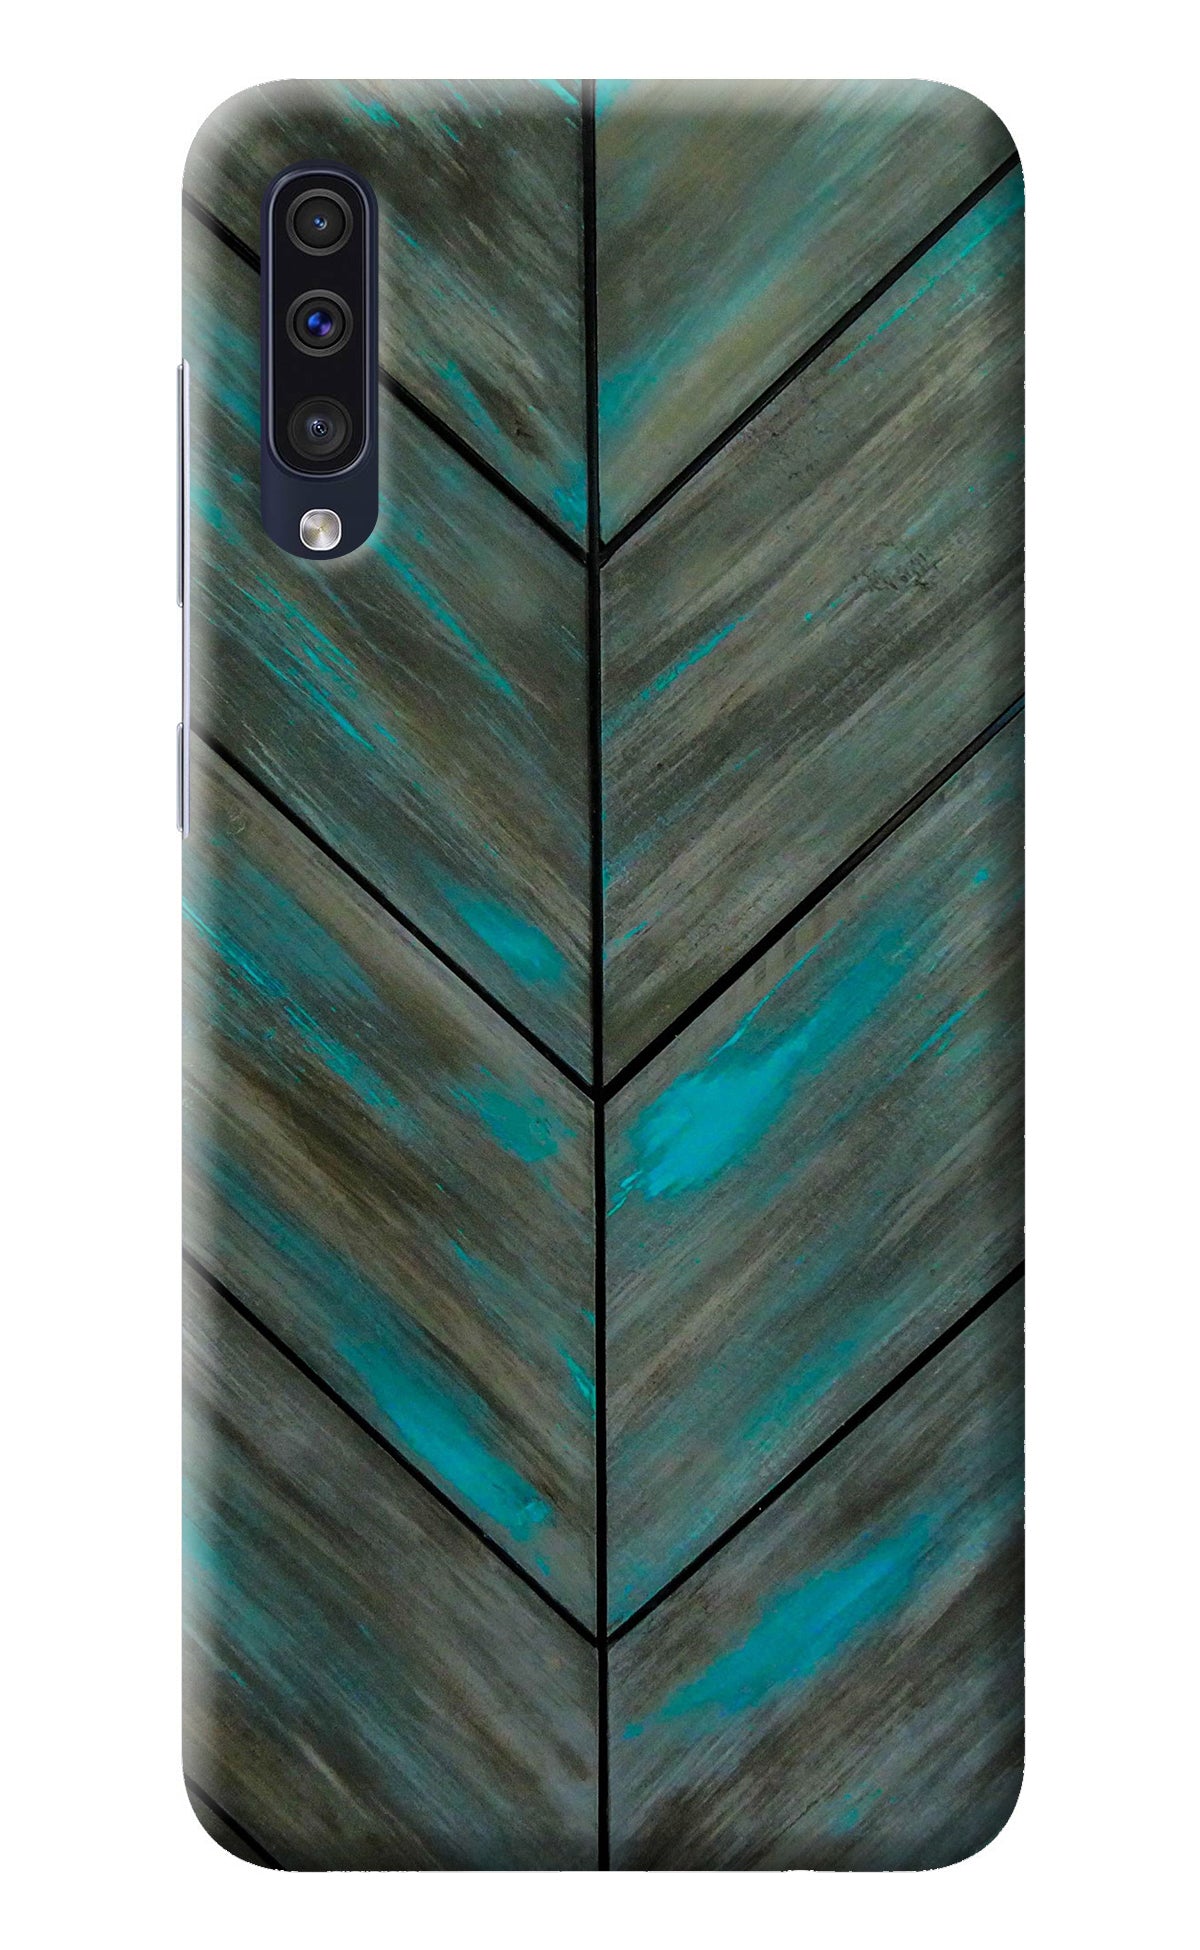 Pattern Samsung A50/A50s/A30s Back Cover